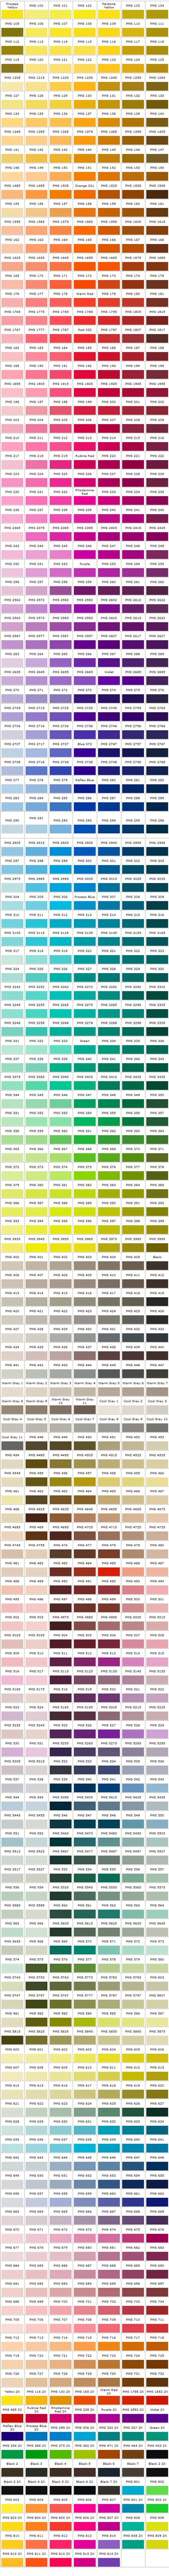 Pantone Color Reference Chart Reference Chart Pms Colour Color